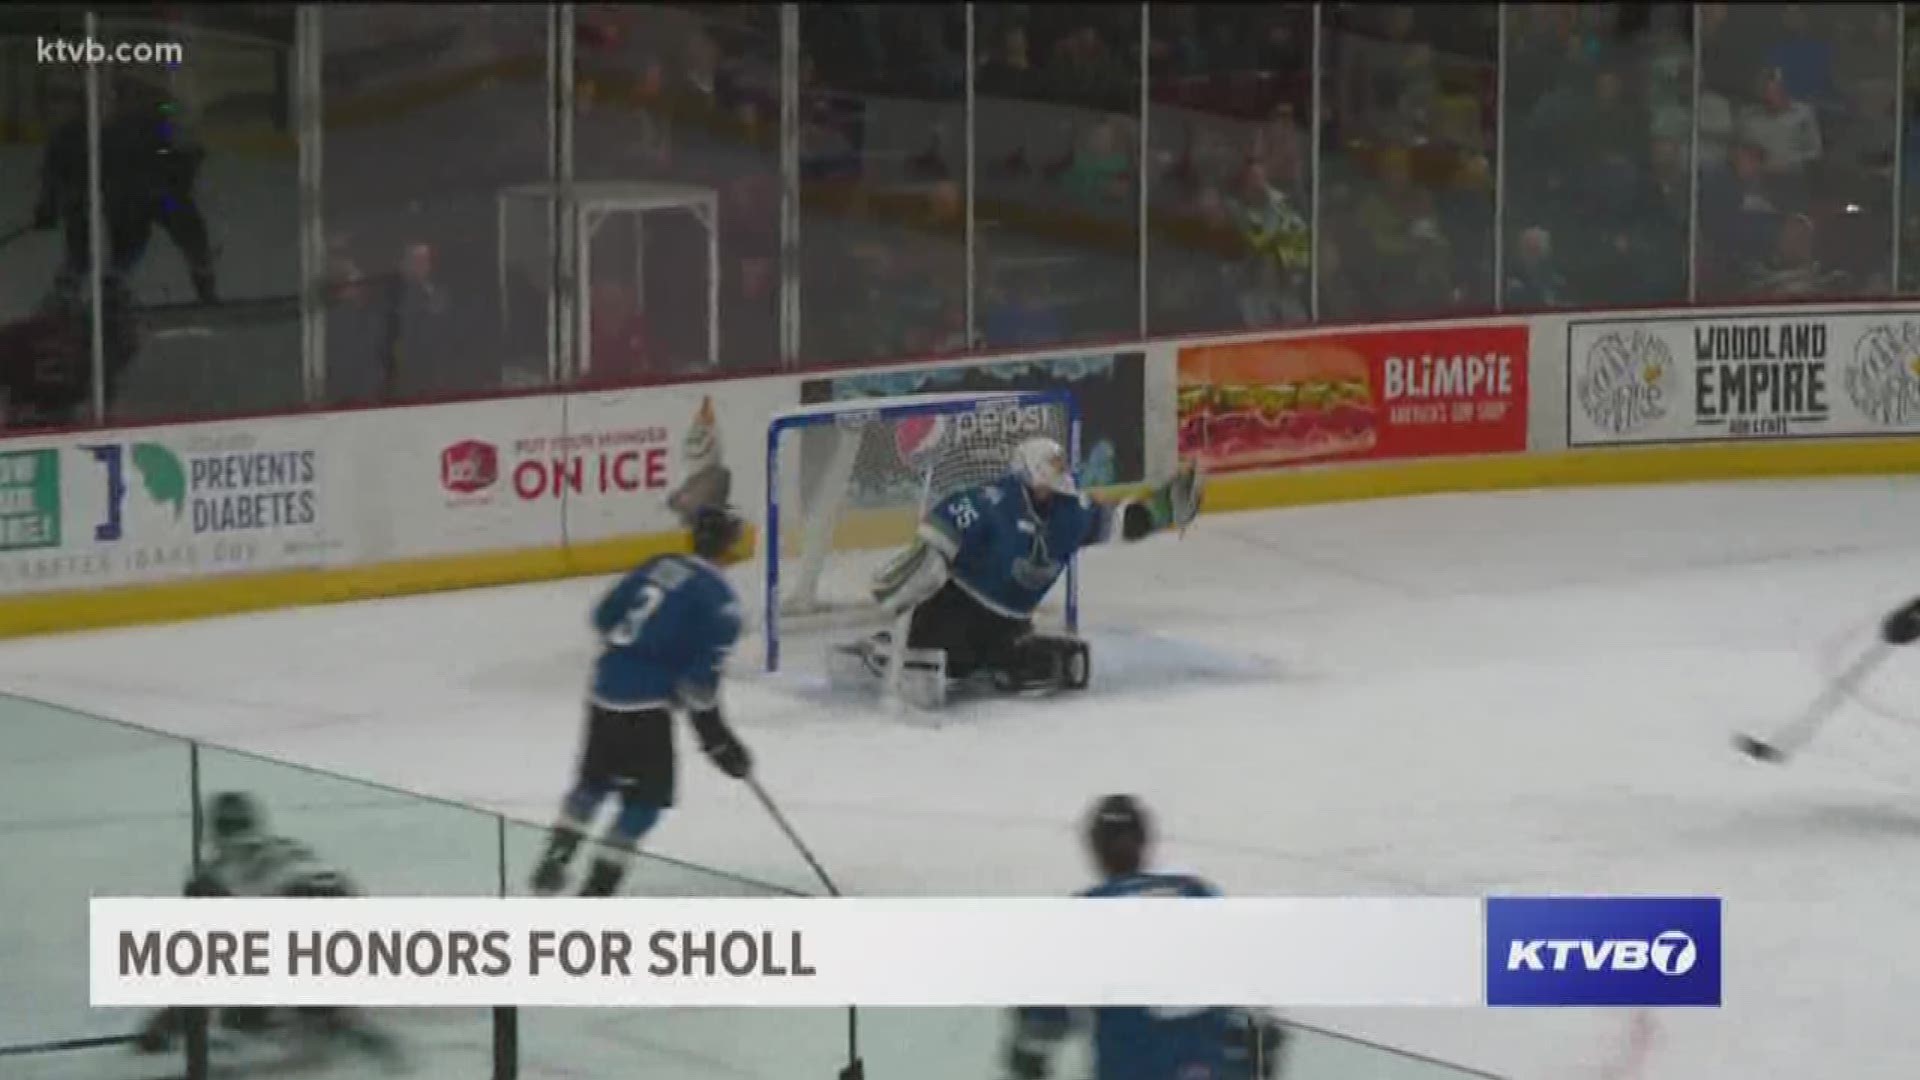 The Idaho Steelheads wrap up the regular season after clinching a playoff spot and their goalie, Thomas Sholl gets league honors for his play.